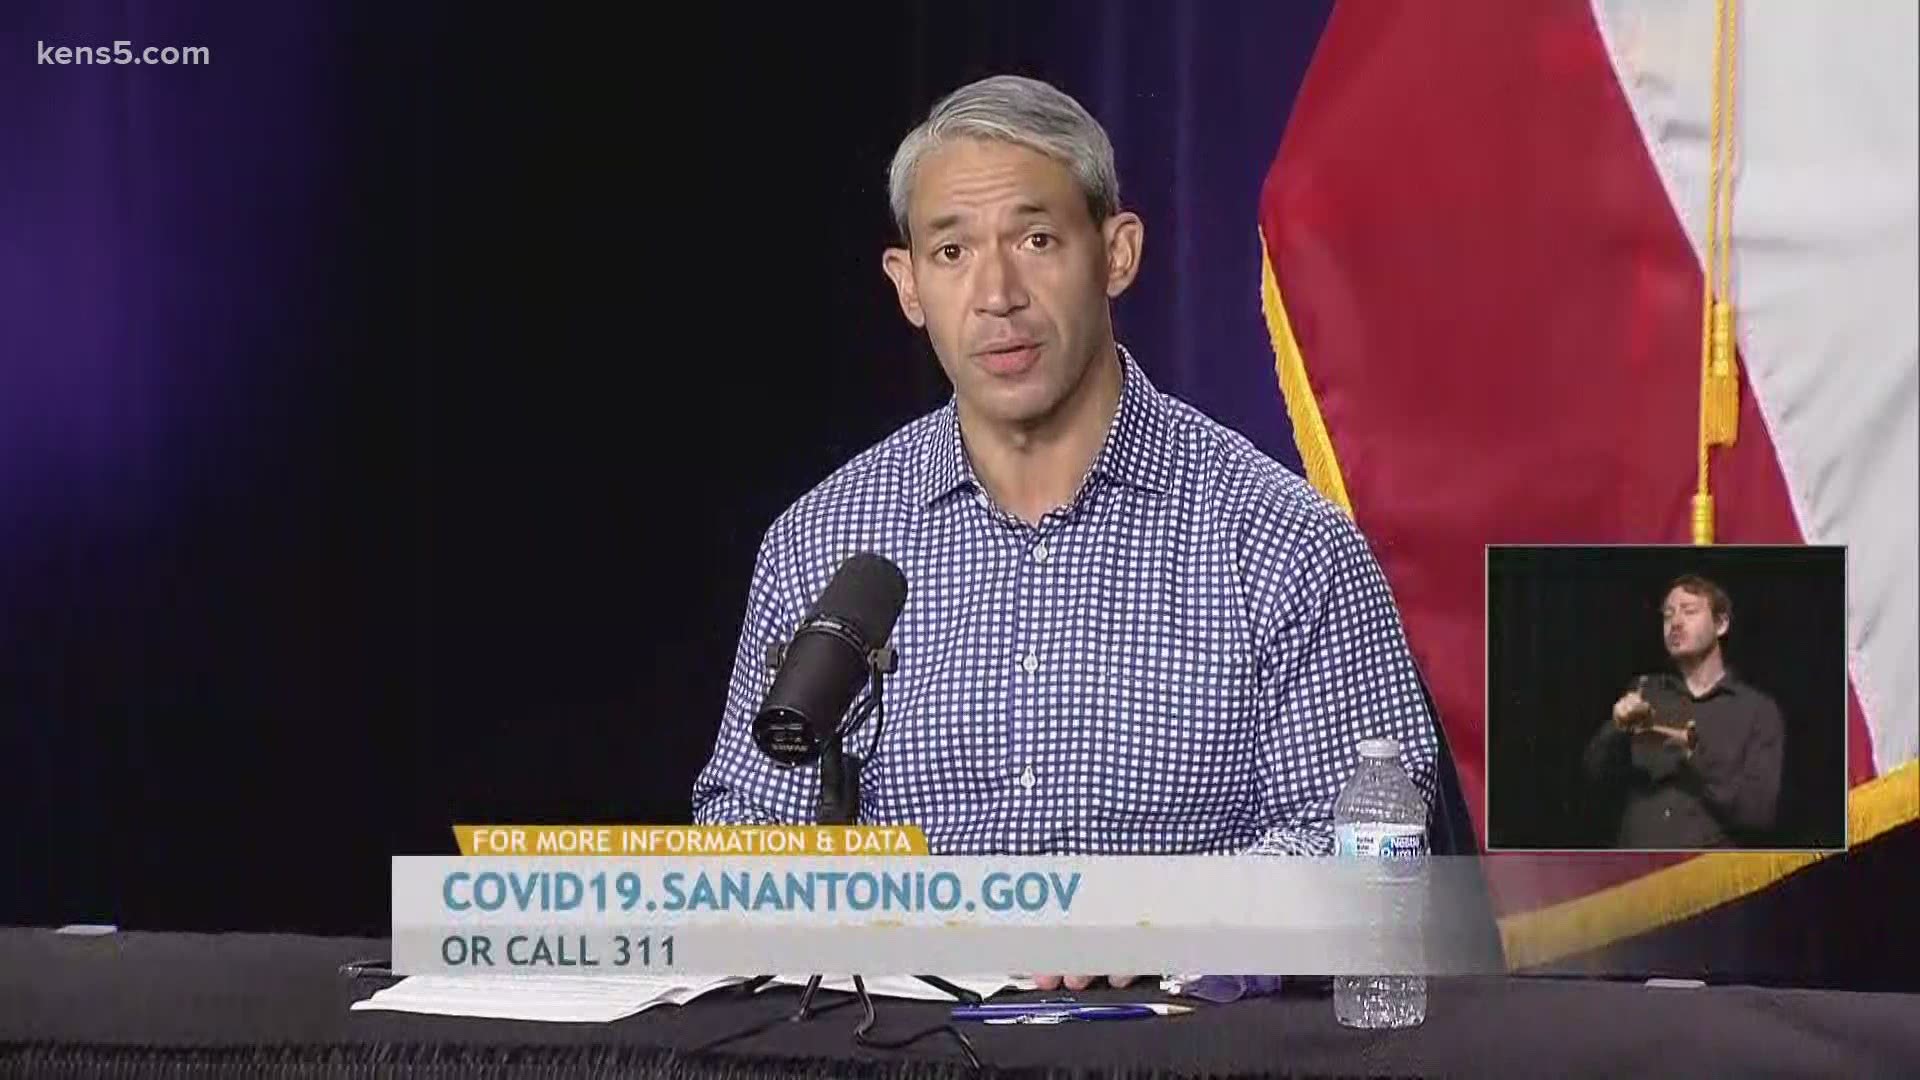 Mayor Nirenberg reported a large jump of 417 new coronavirus cases, bringing the total to 68,044 moving the 7 day moving average to 234. No new deaths were reported.